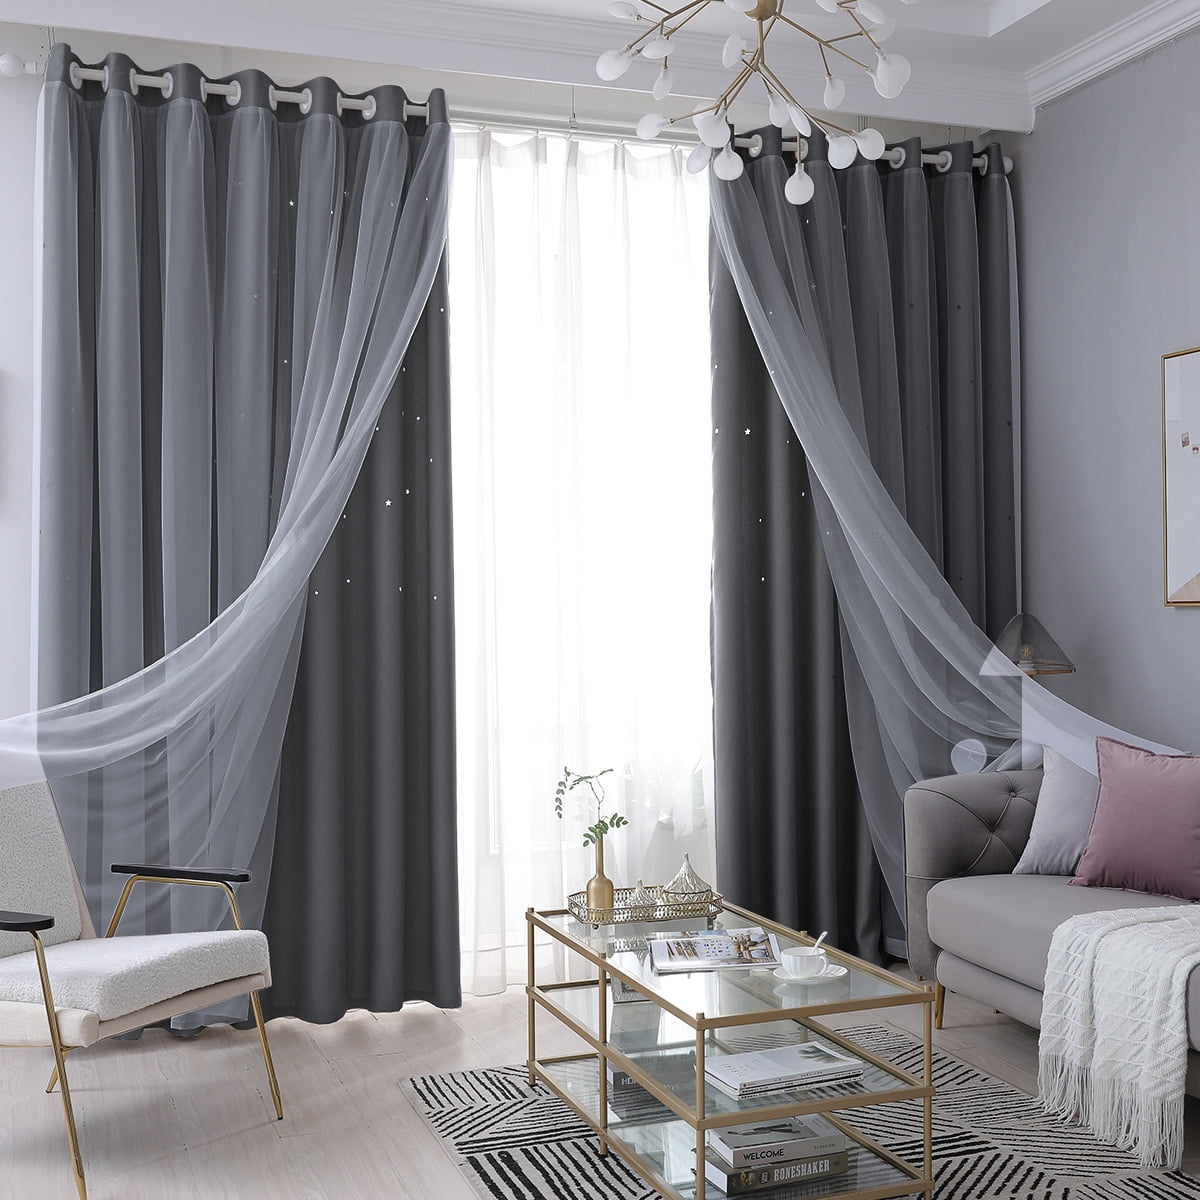 1/2/4 Panels Window Curtain Double-Layer Yarn Tulle Hollow-Out Star Ombre Drapes 